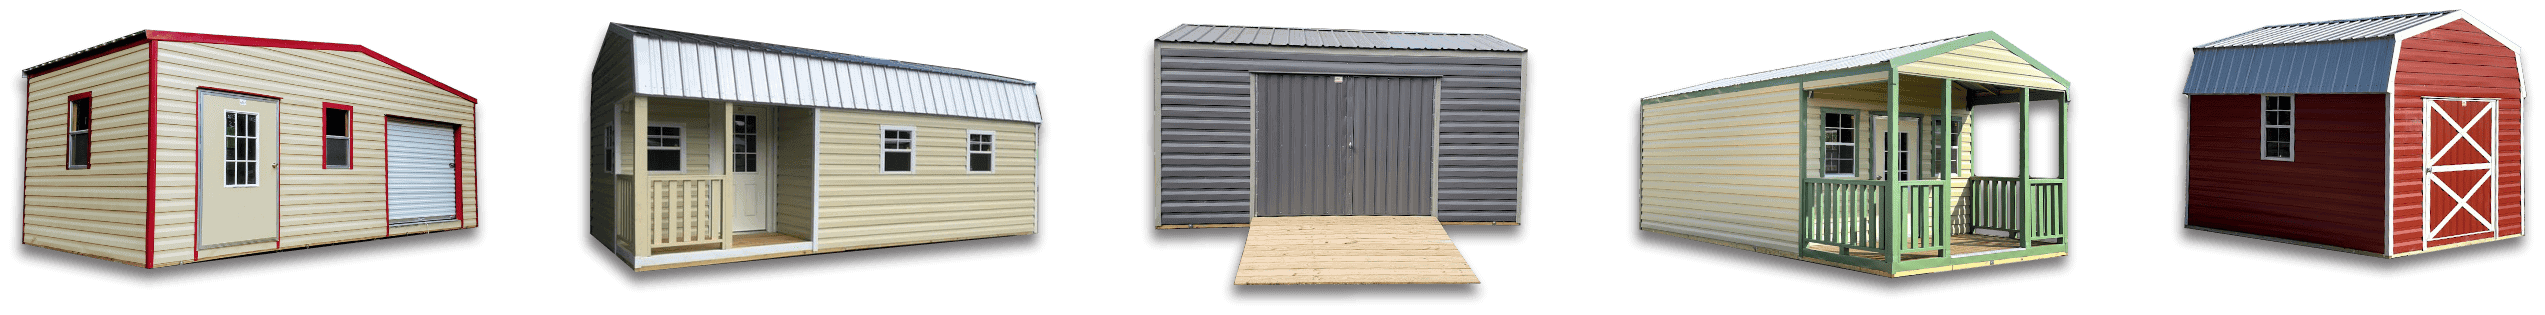 14x24 portable storage shed for sale - Explore our shed styles | Robin Sheds